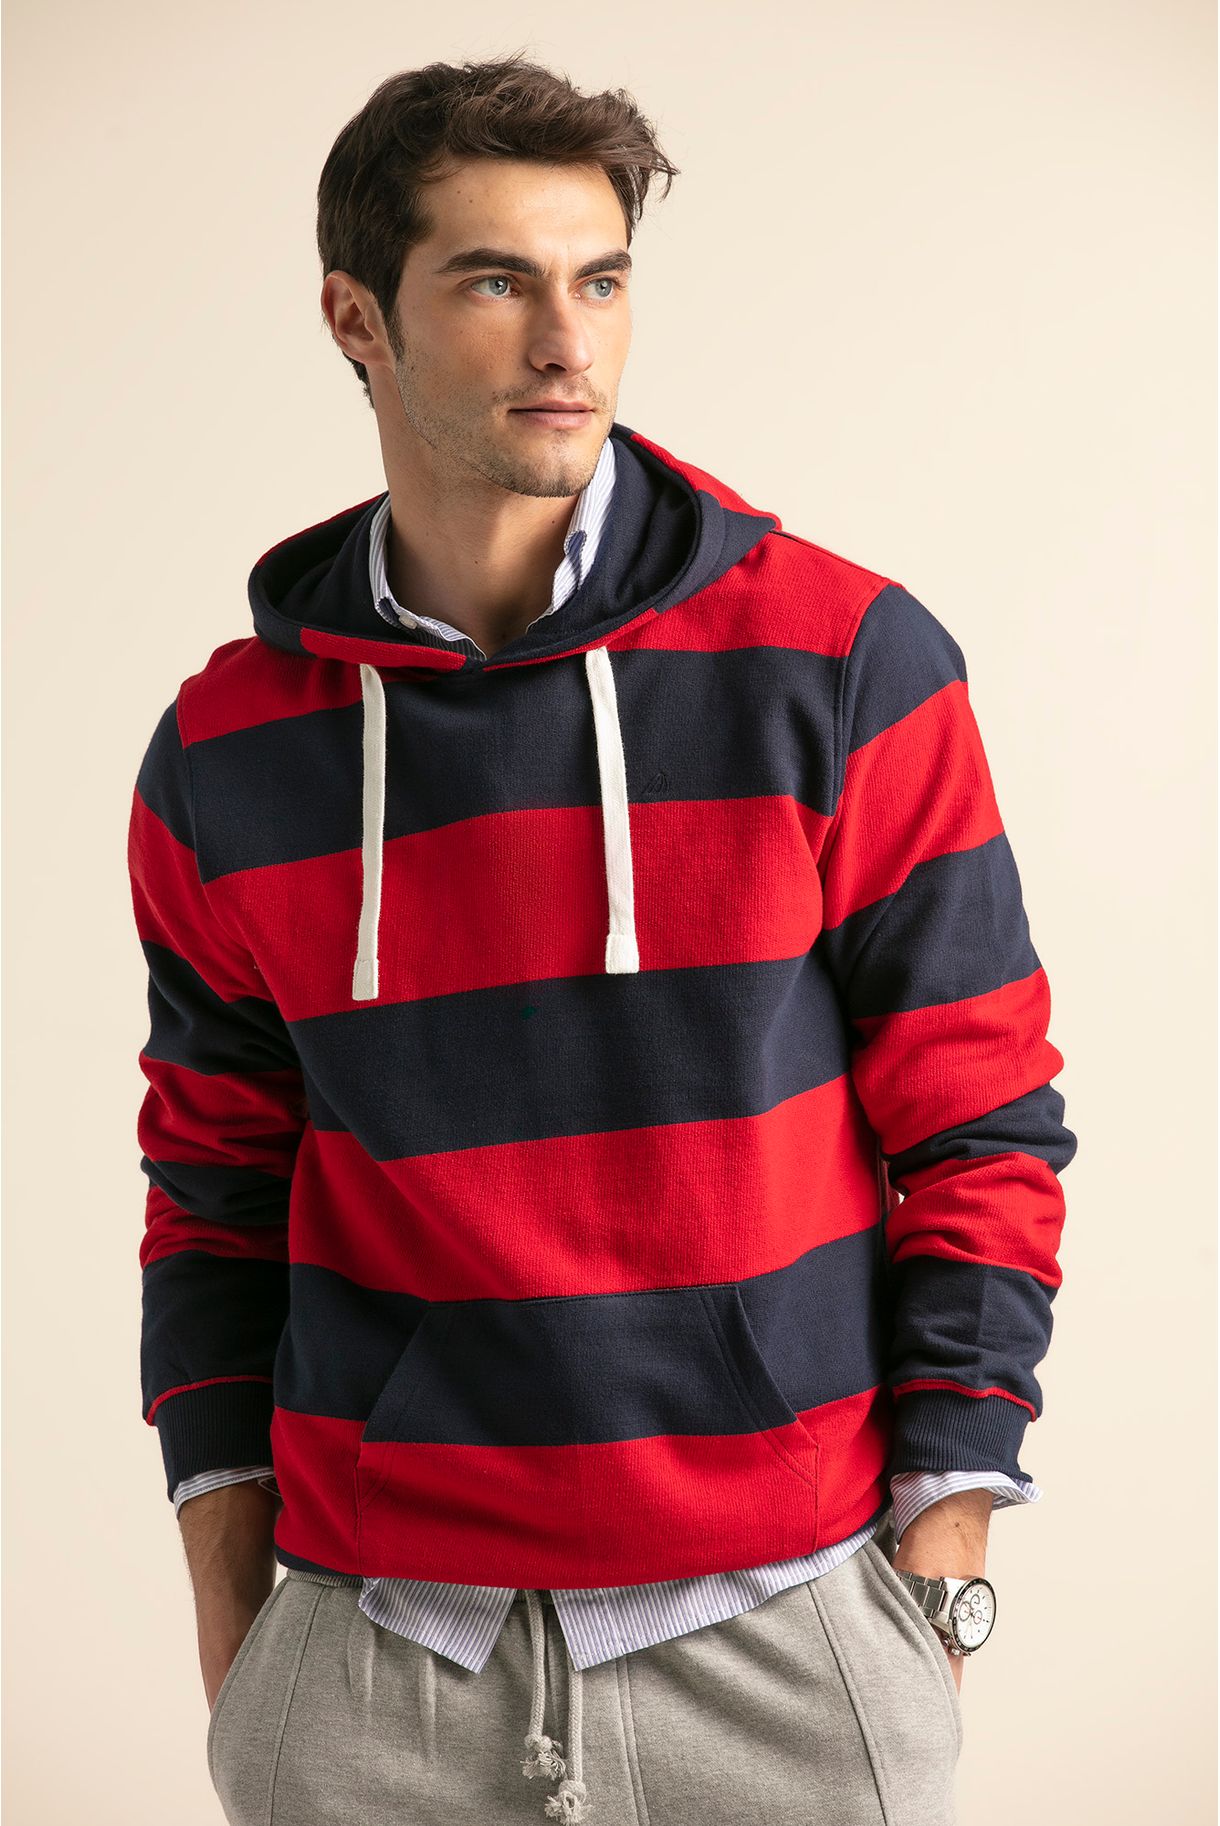 Hooded sweatshirt with stripes